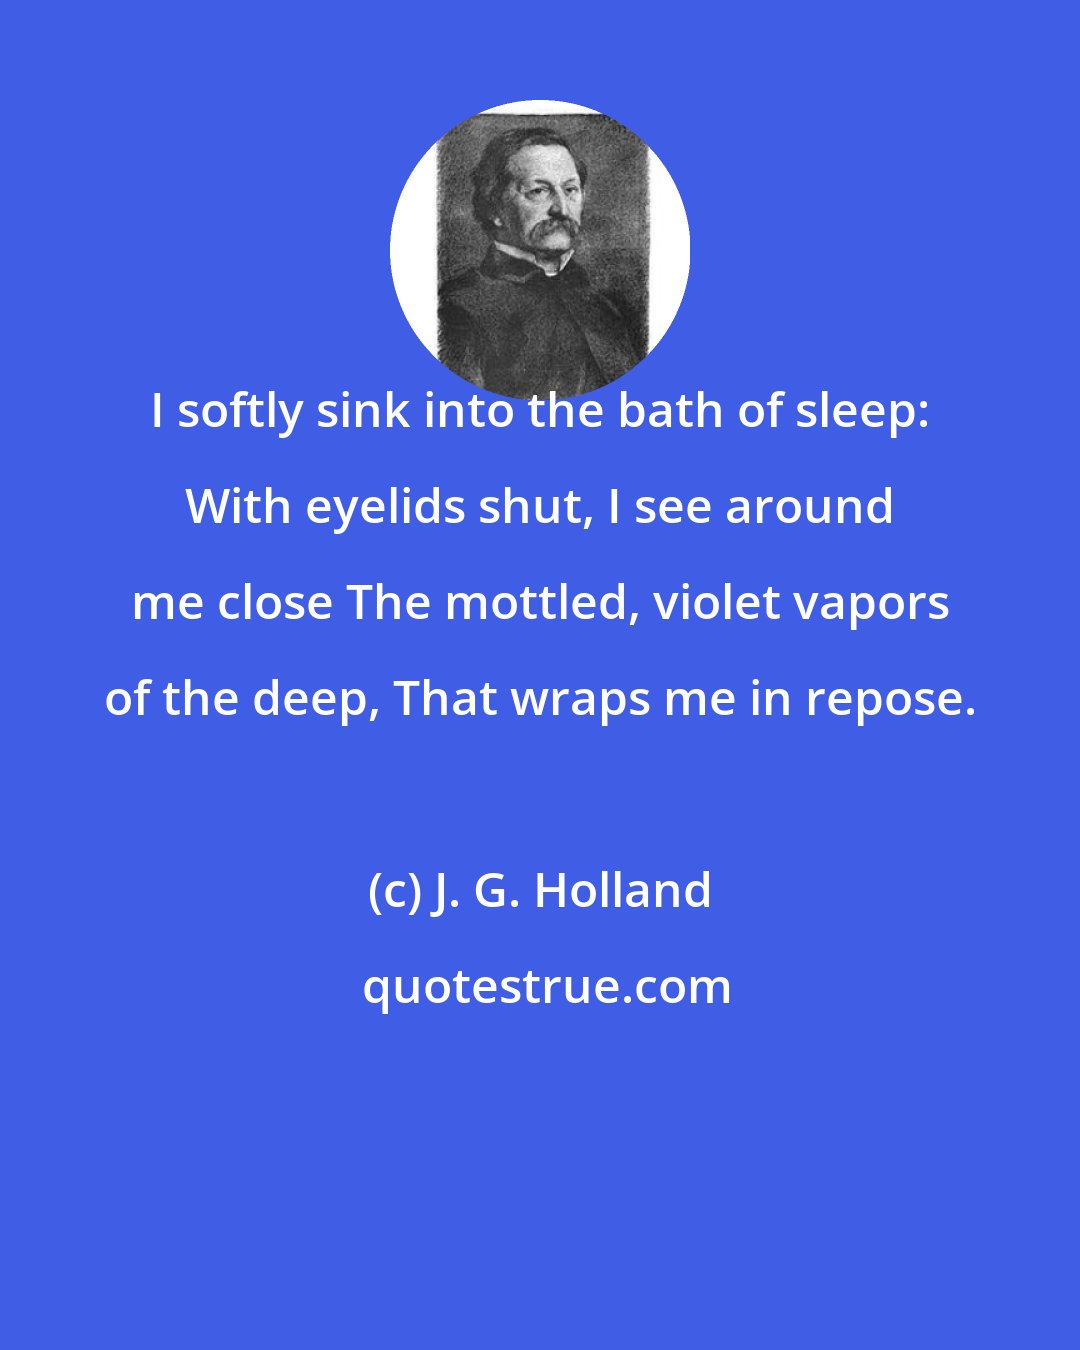 J. G. Holland: I softly sink into the bath of sleep: With eyelids shut, I see around me close The mottled, violet vapors of the deep, That wraps me in repose.